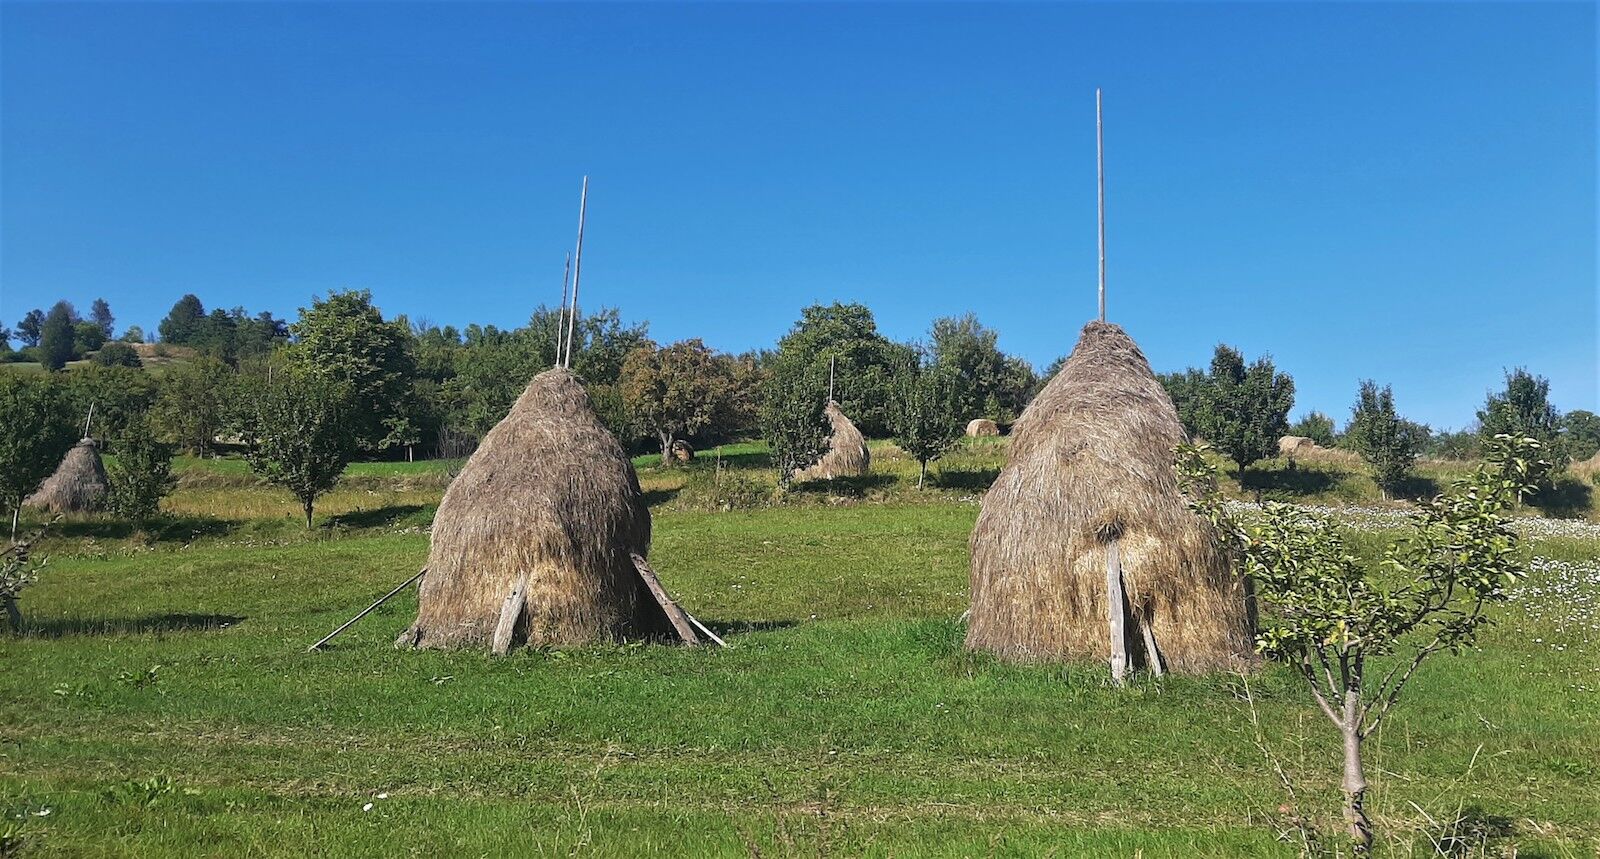 Haystacks like this are frequent sights along the roads in Romania